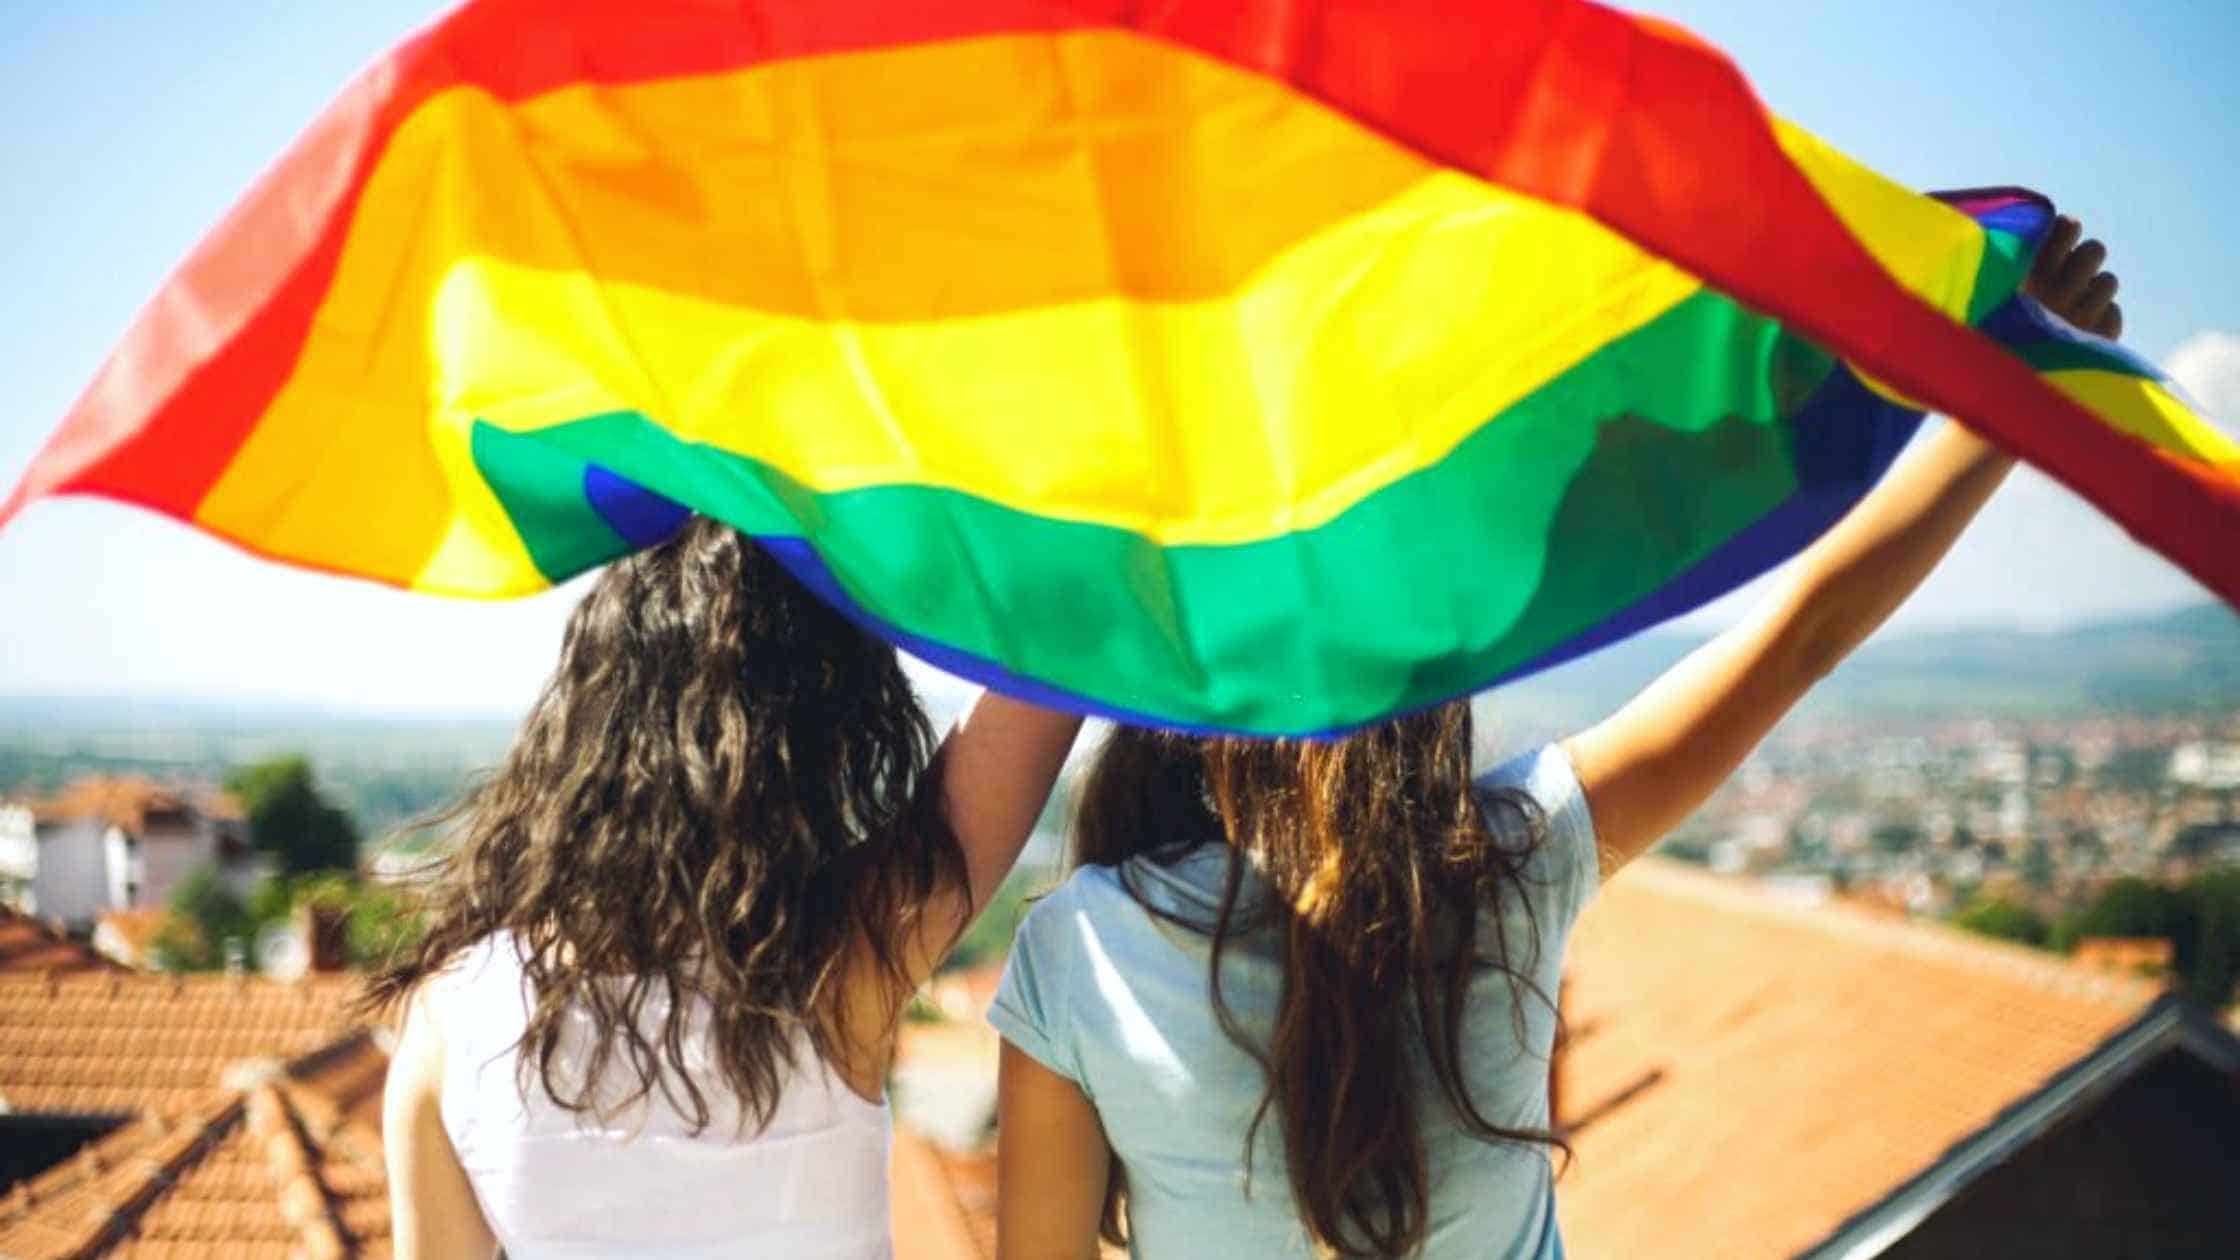 Importance of Inclusivity in the LGBTQ Community